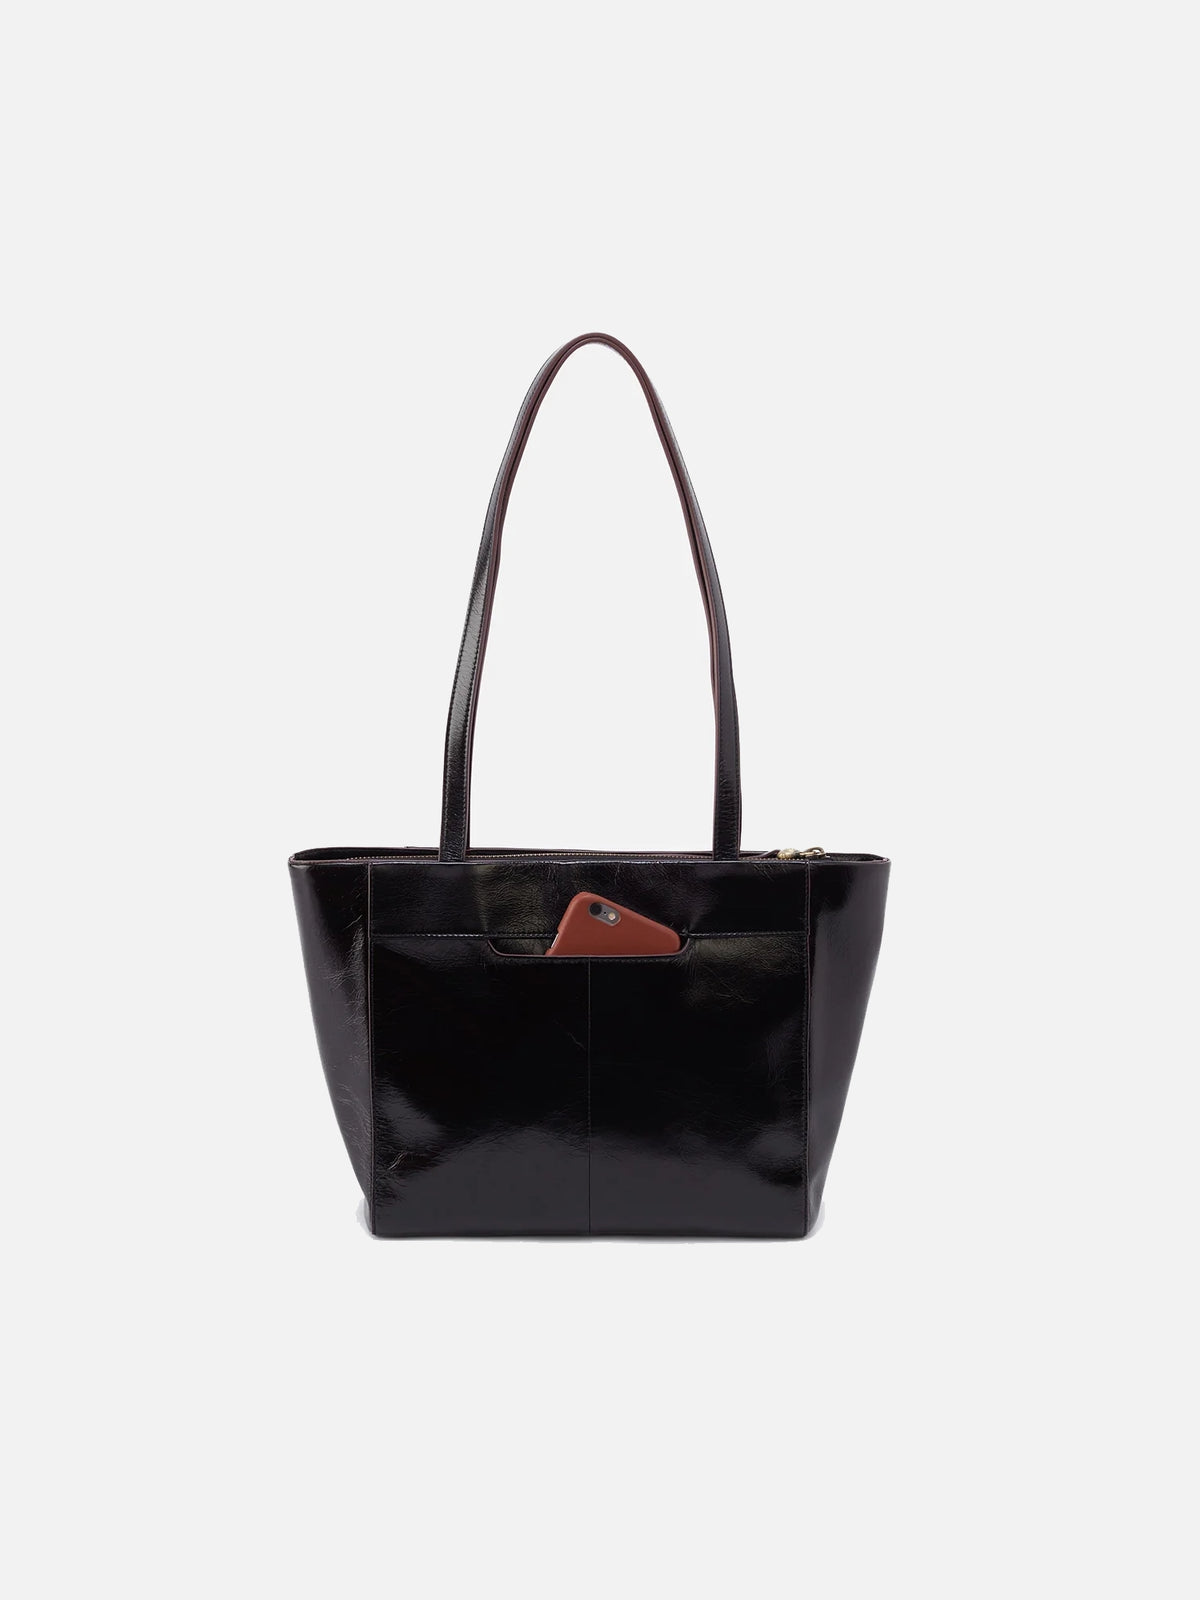 hobo haven tote bag in black polished leather